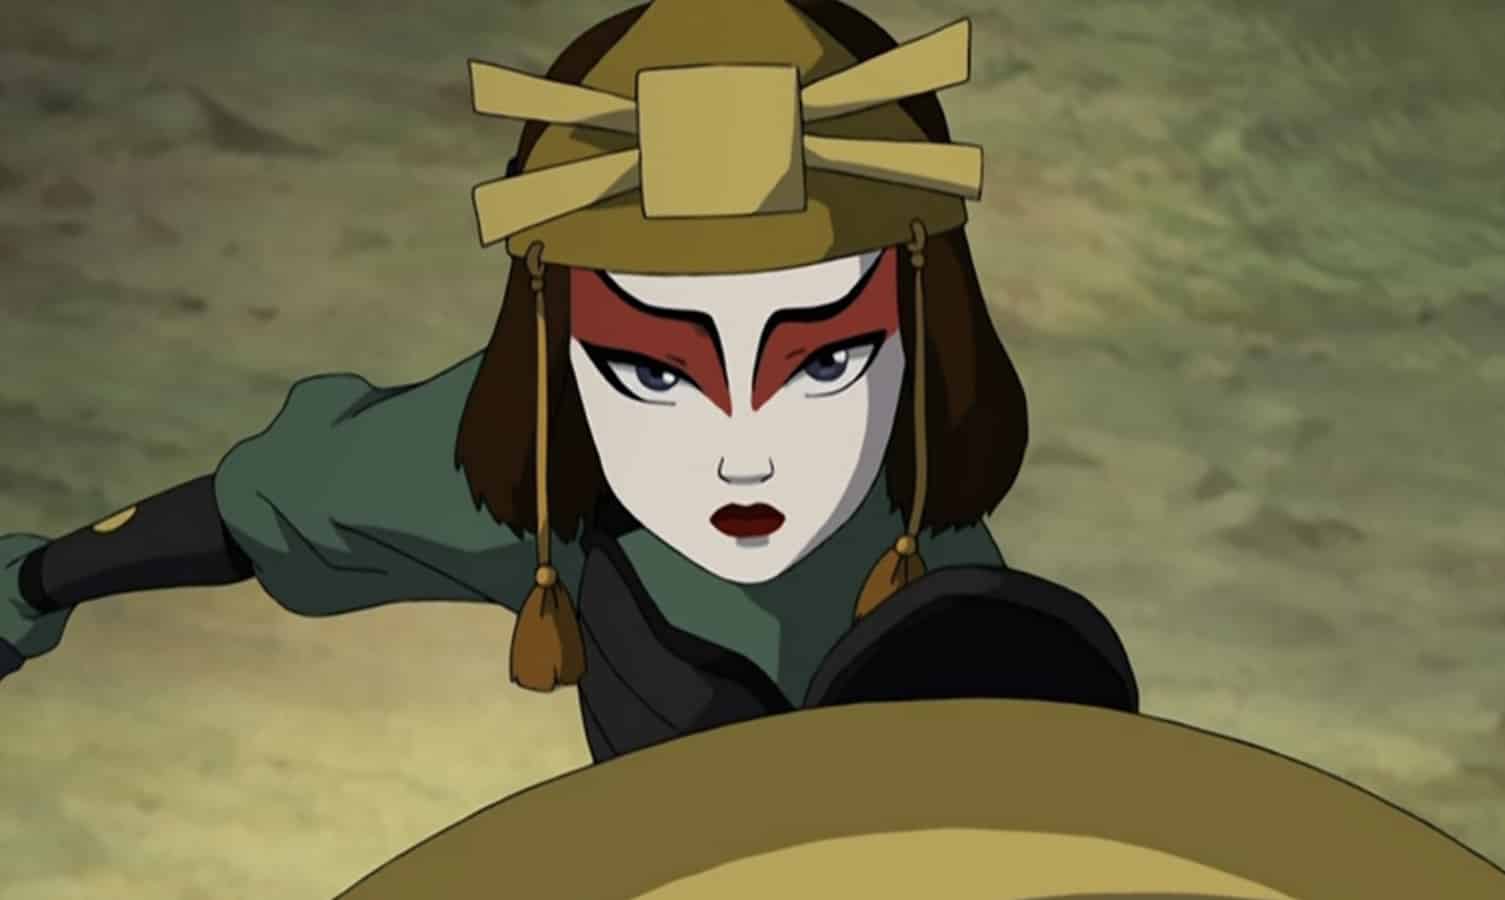 Screenshot of Suki from Book 3 of Avatar: The Last Airbender.